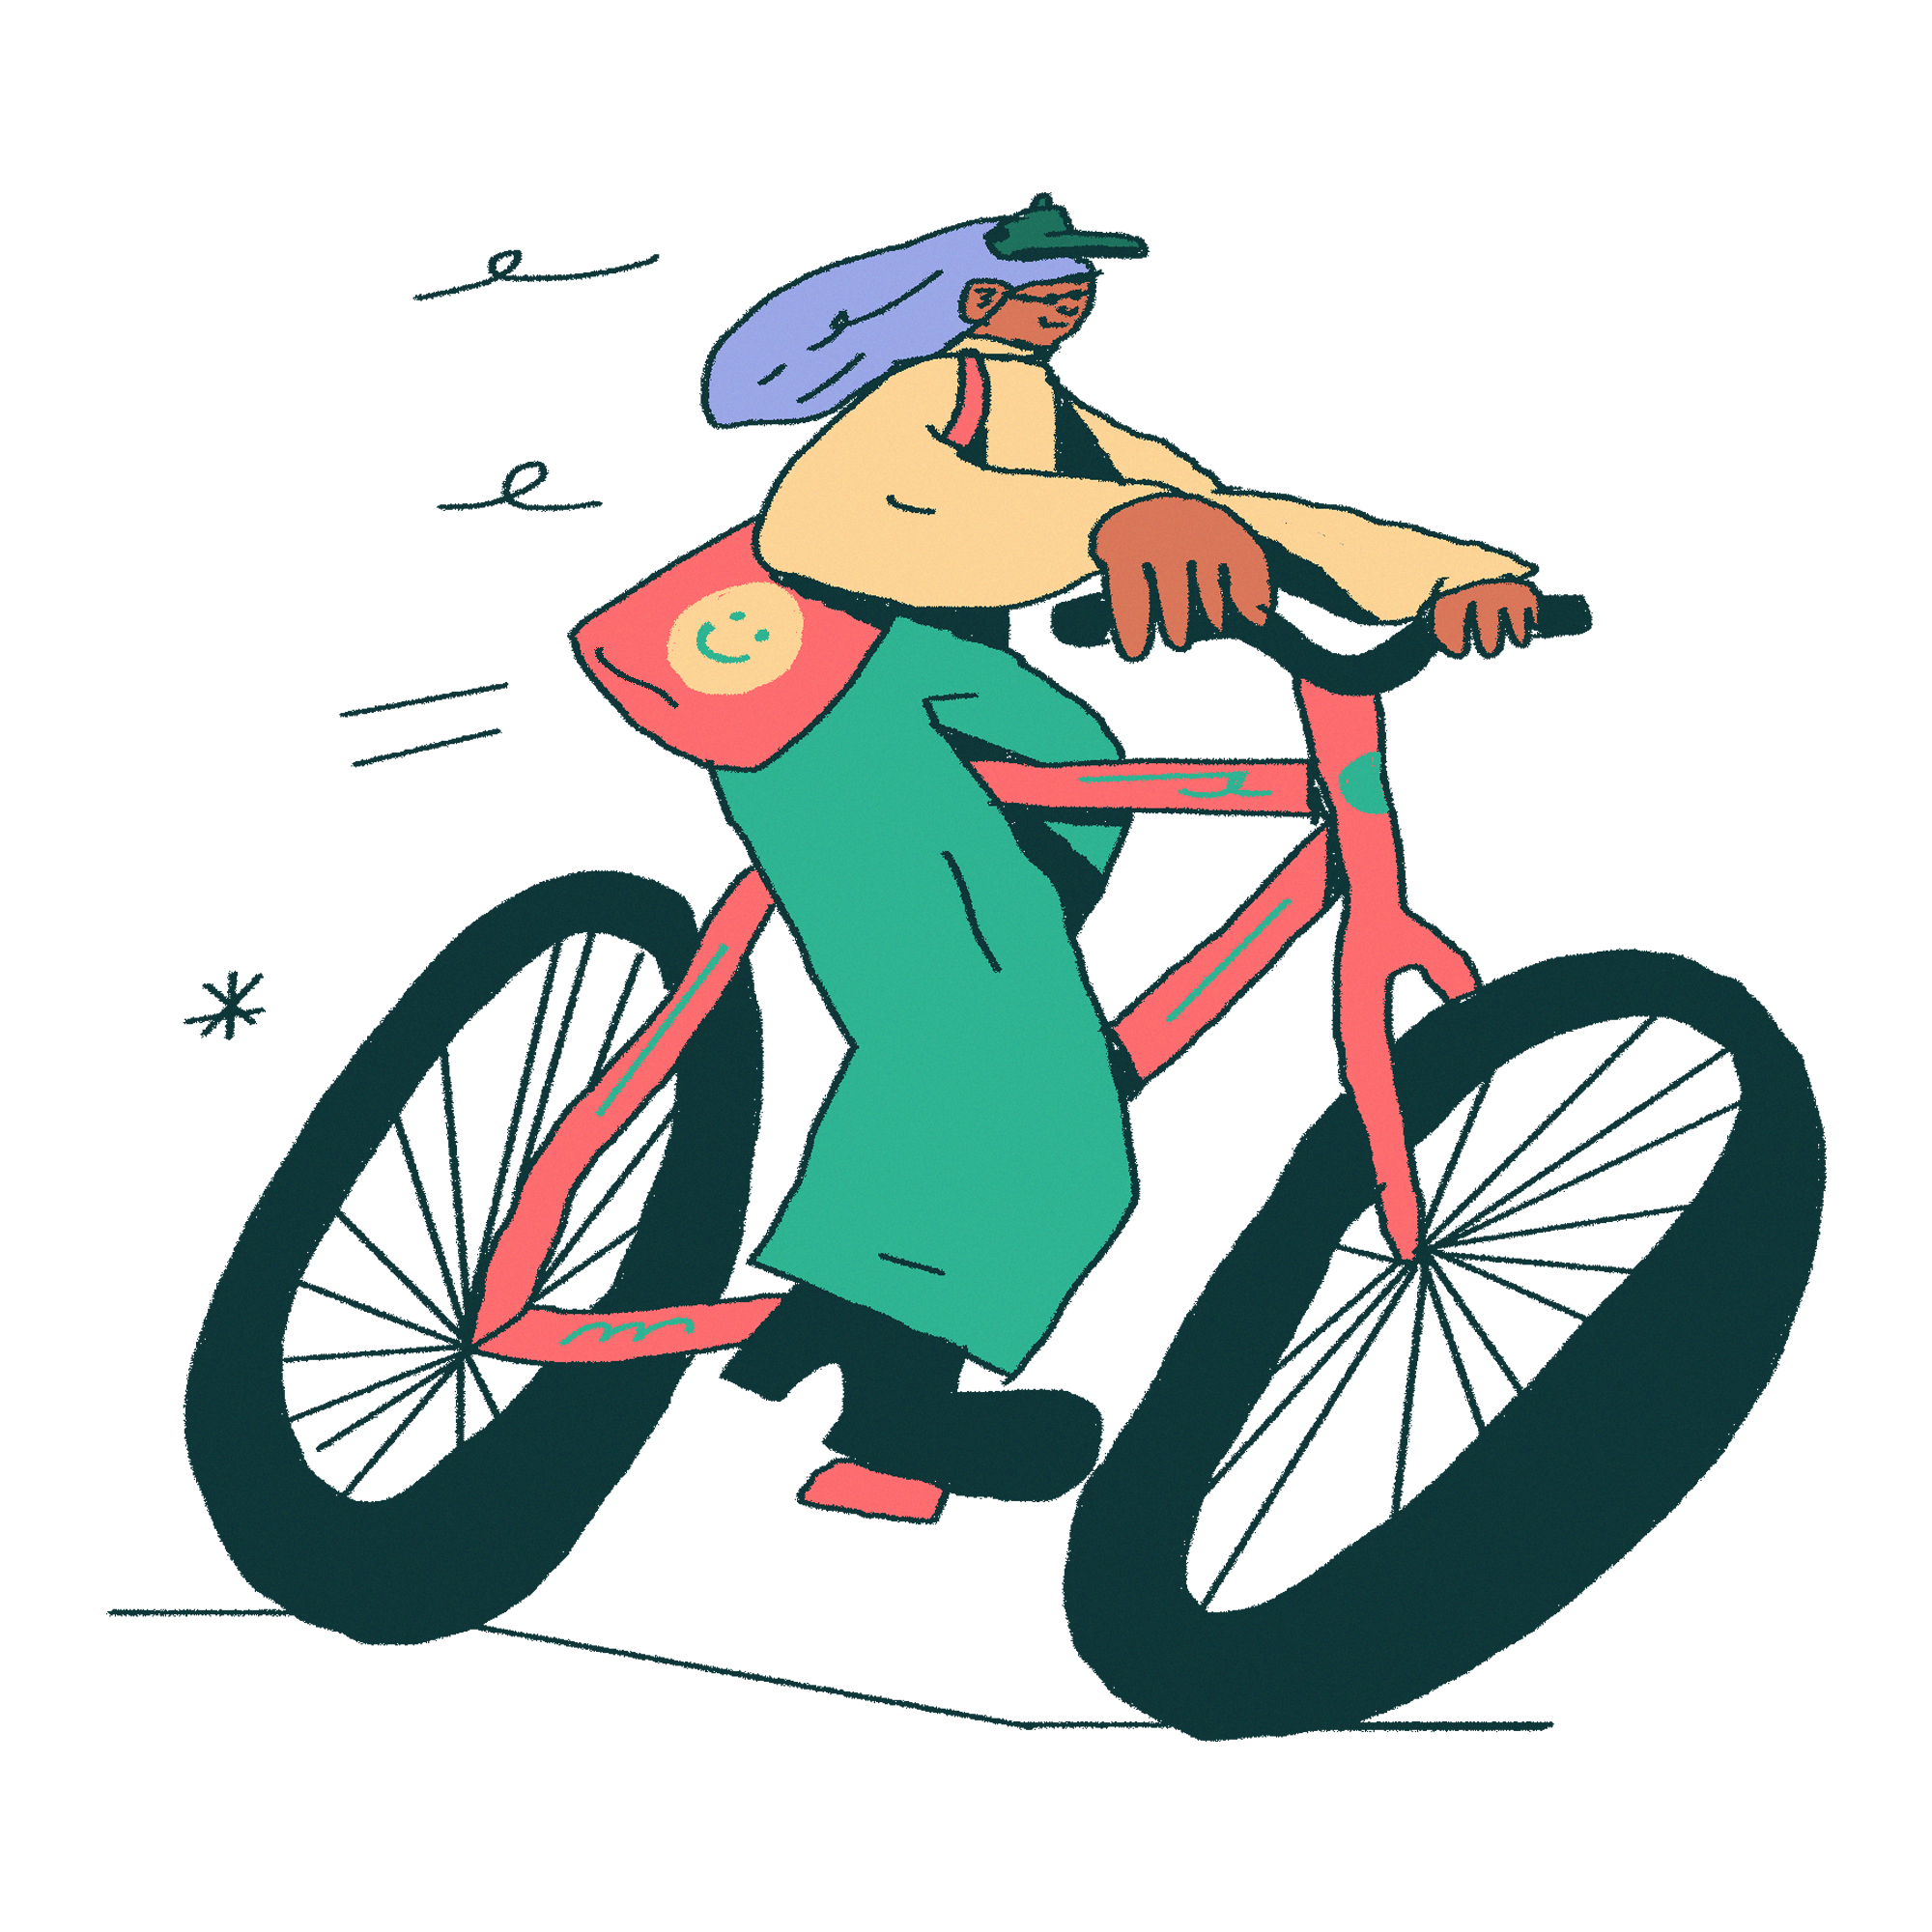 Illustration of a person on a bike